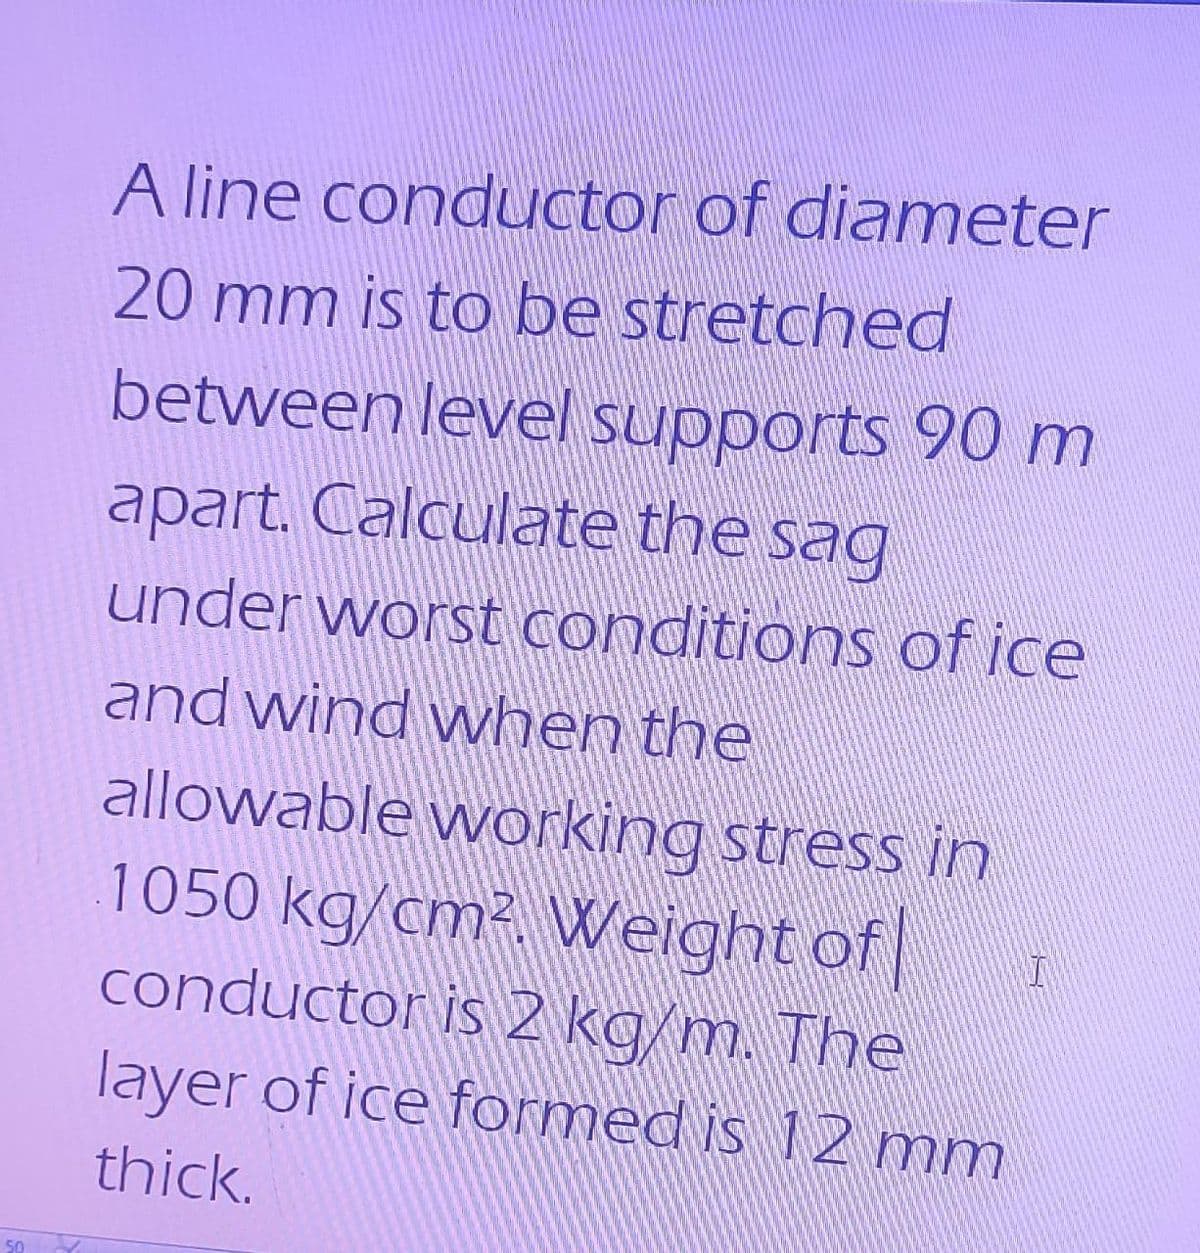 50
A line conductor of diameter
20 mm is to be stretched
between level supports 90 m
apart. Calculate the sag
under worst conditions of ice
and wind when the
allowable working stress in
1050 kg/cm². Weight of
conductor is 2 kg/m. The
layer of ice formed is 12 mm
thick.
I